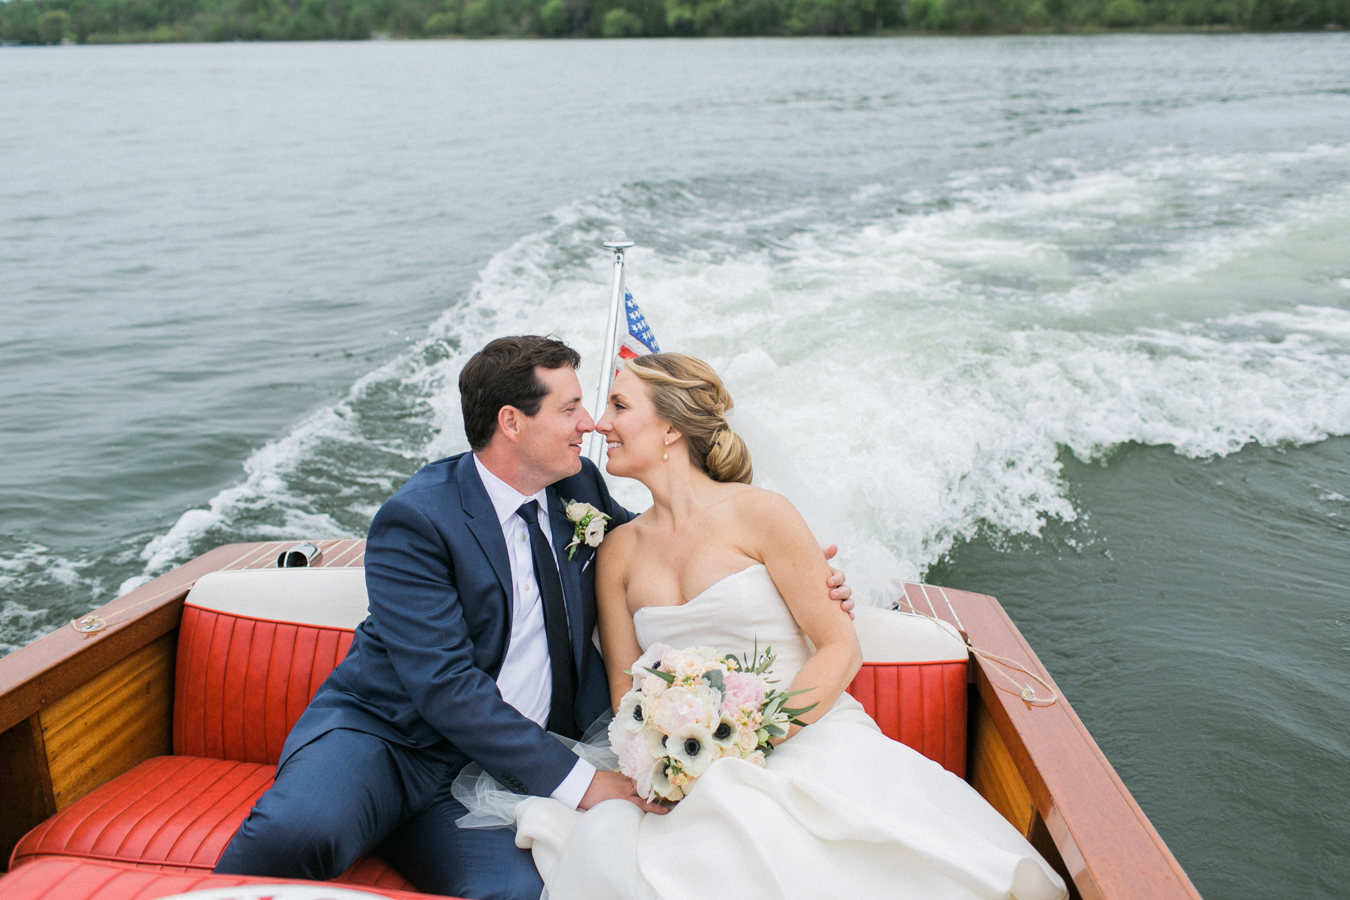 Cory Weber Photography | Sincerely Ginger Weddings | Vintage ChrisCraft Wooden Boat